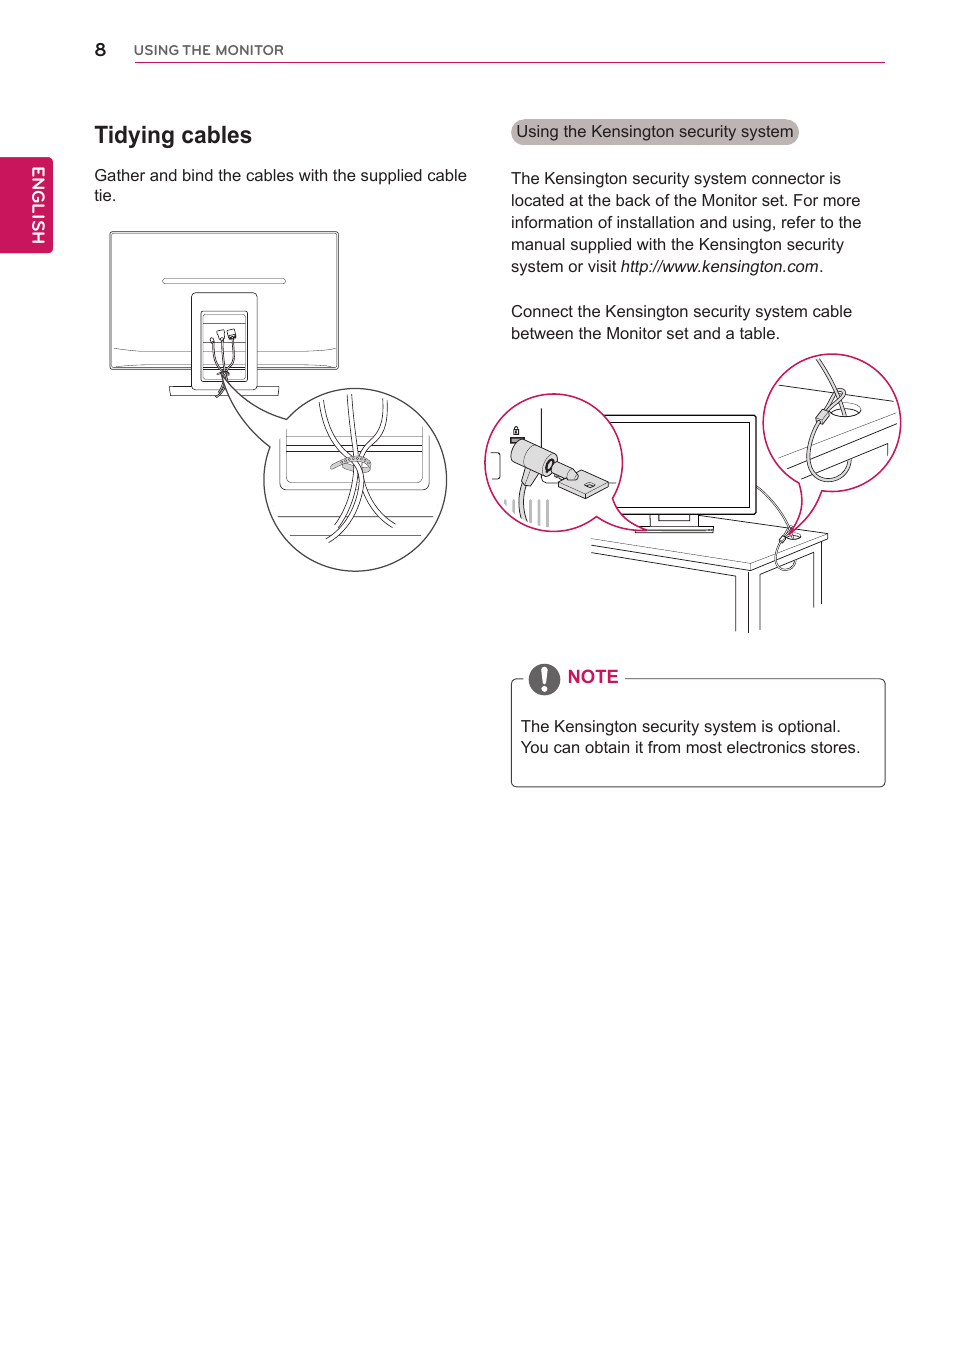 Tidying cables | LG 27EA83R-D User Manual | Page 8 / 26